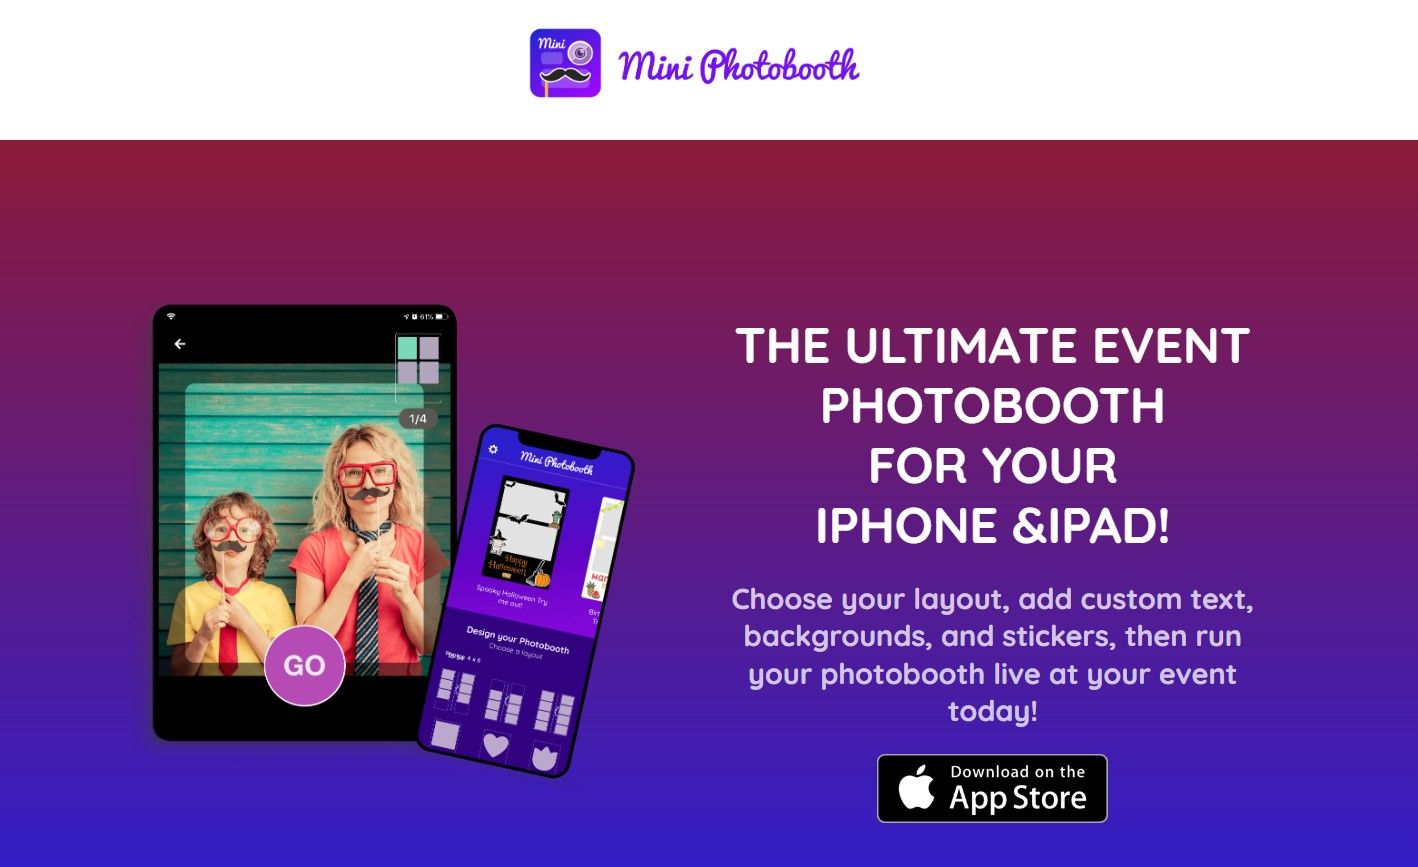 Mini Photobooth - Creative and Customizable Photo Booth Experience for iPhones and iPads